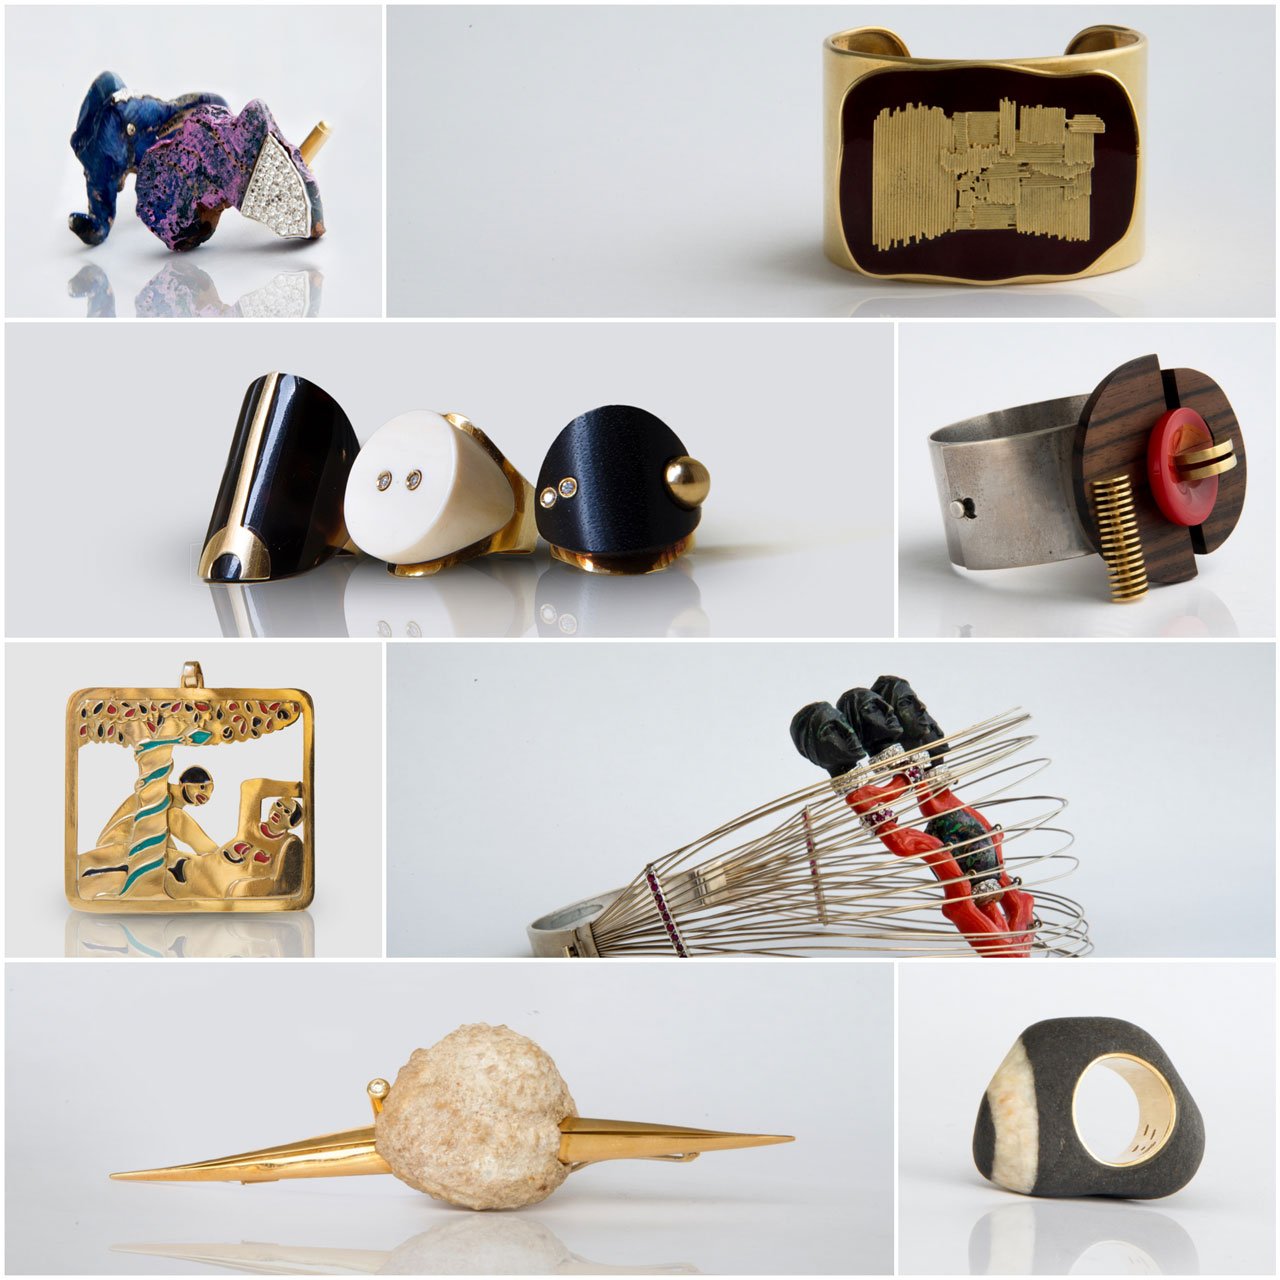 Captions from left to right, top to bottom:&gt; Cufflinks representing elephant /Africa in wood &amp; diamonds, by Armando Tanzini Kenya/ NY, 1977.￼￼￼&gt; Yellow gold bracelet with red enamel by Saverio Cavalli, Italy, 1962.&gt; Gold and ivory ring by Paolo Spalla / Gold and ebony ring by Paolo Spalla / Gold and turtle ring by Paolo Spalla, (1960)&gt; Gold and silver bracelet with red perspex on wood by Saverio Cavalli, Italy, 1968.&gt; Pendant in gold and polychrome enamel representing Adam and Eve, by Salvatore Fiume, Italy, 1970.&gt; White gold,coral and diamonds necklace representing 5 woman faces,by Armando Tanzini, Kenya,New york, 1977.&gt; Gold and fossil brooch, by Paolo Spalla, Italy, 1960.&gt; Gold and stone ring by Paolo Spalla, Italy, 1960.Tiziana Serretta, private collection, photographs by Javier Alejandro.